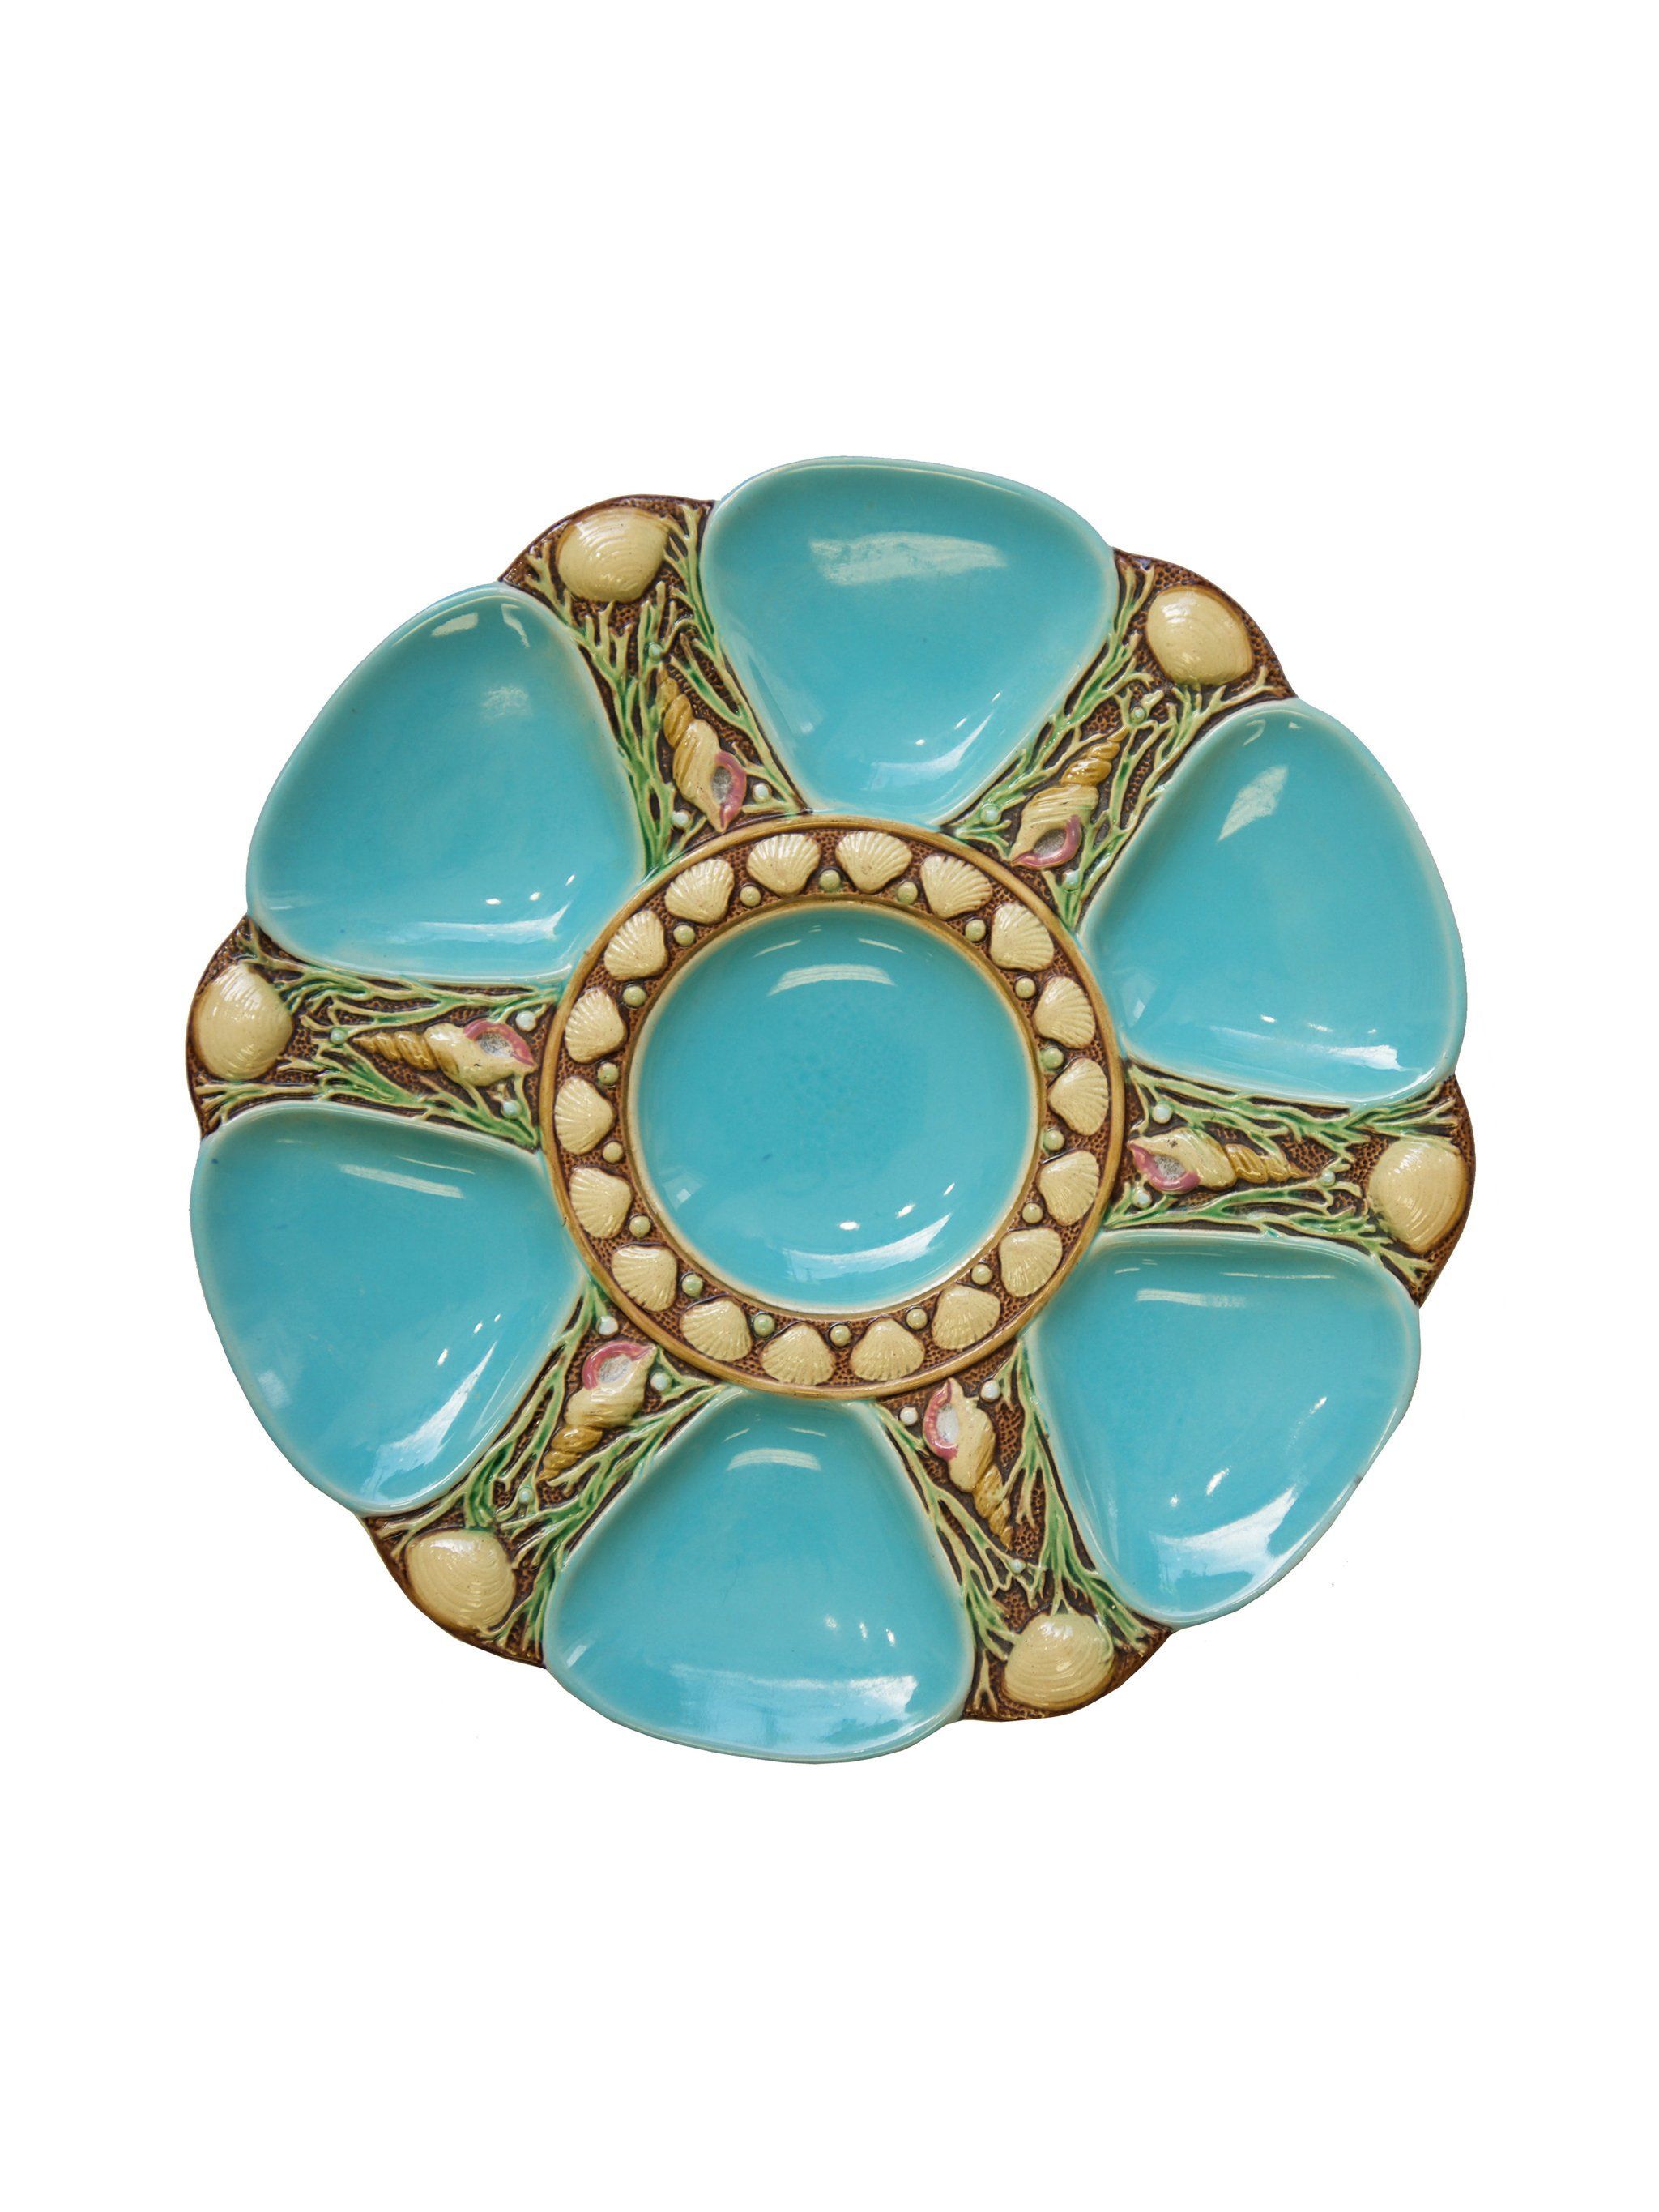 Antique Minton Majolica Cyan Oyster Plate